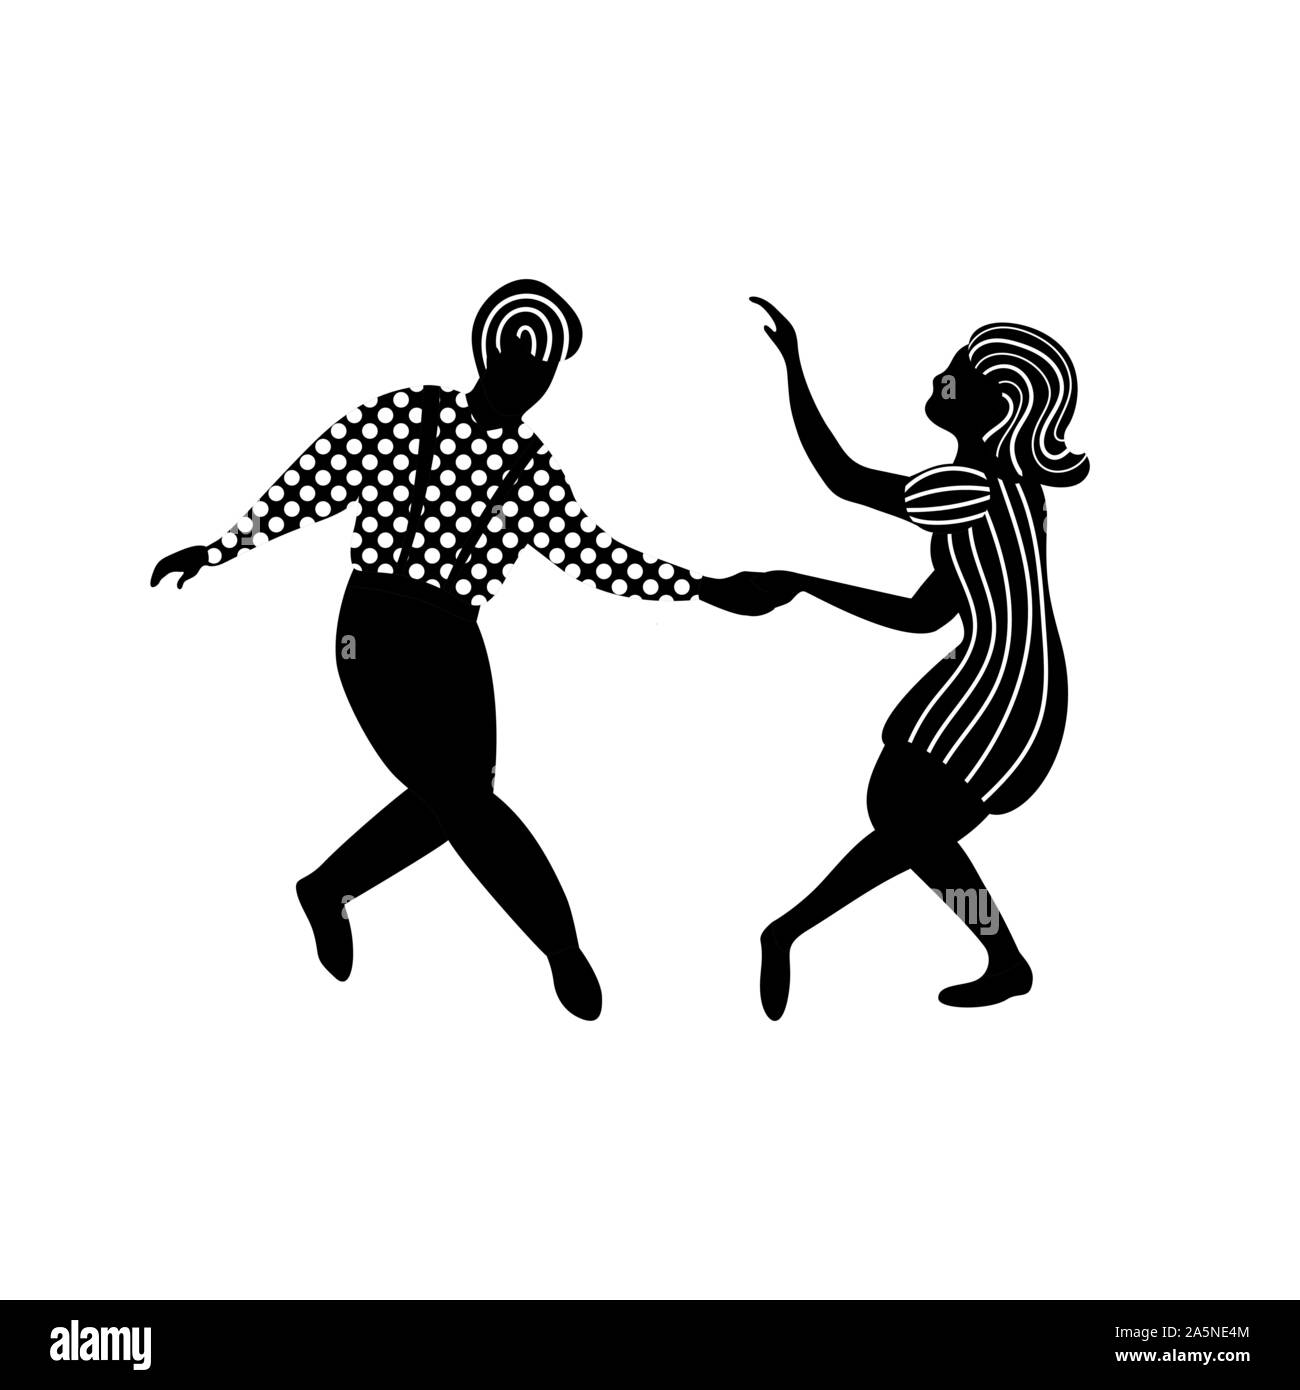 Swing dance couple of people in black and white colors. Man and woman dancing jazz, balboa or lindy hop. Vecctor illustration. Stock Vector